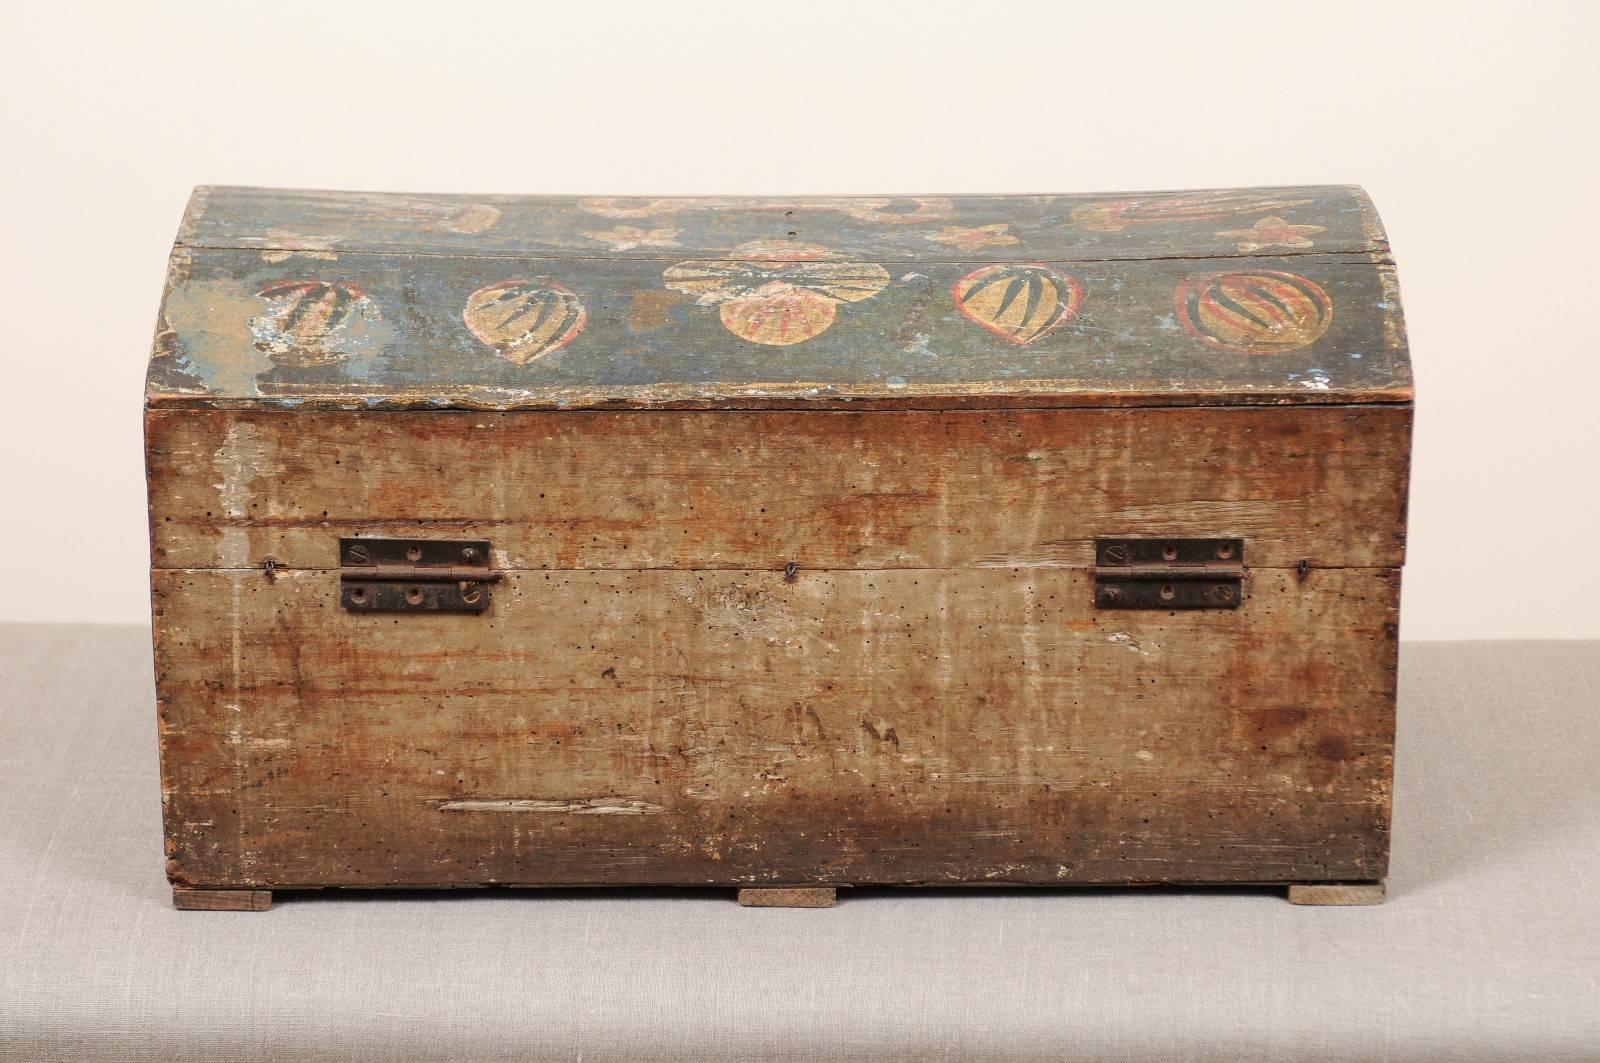 19th Century, Swedish Painted Brides Box with Floral Motif 2